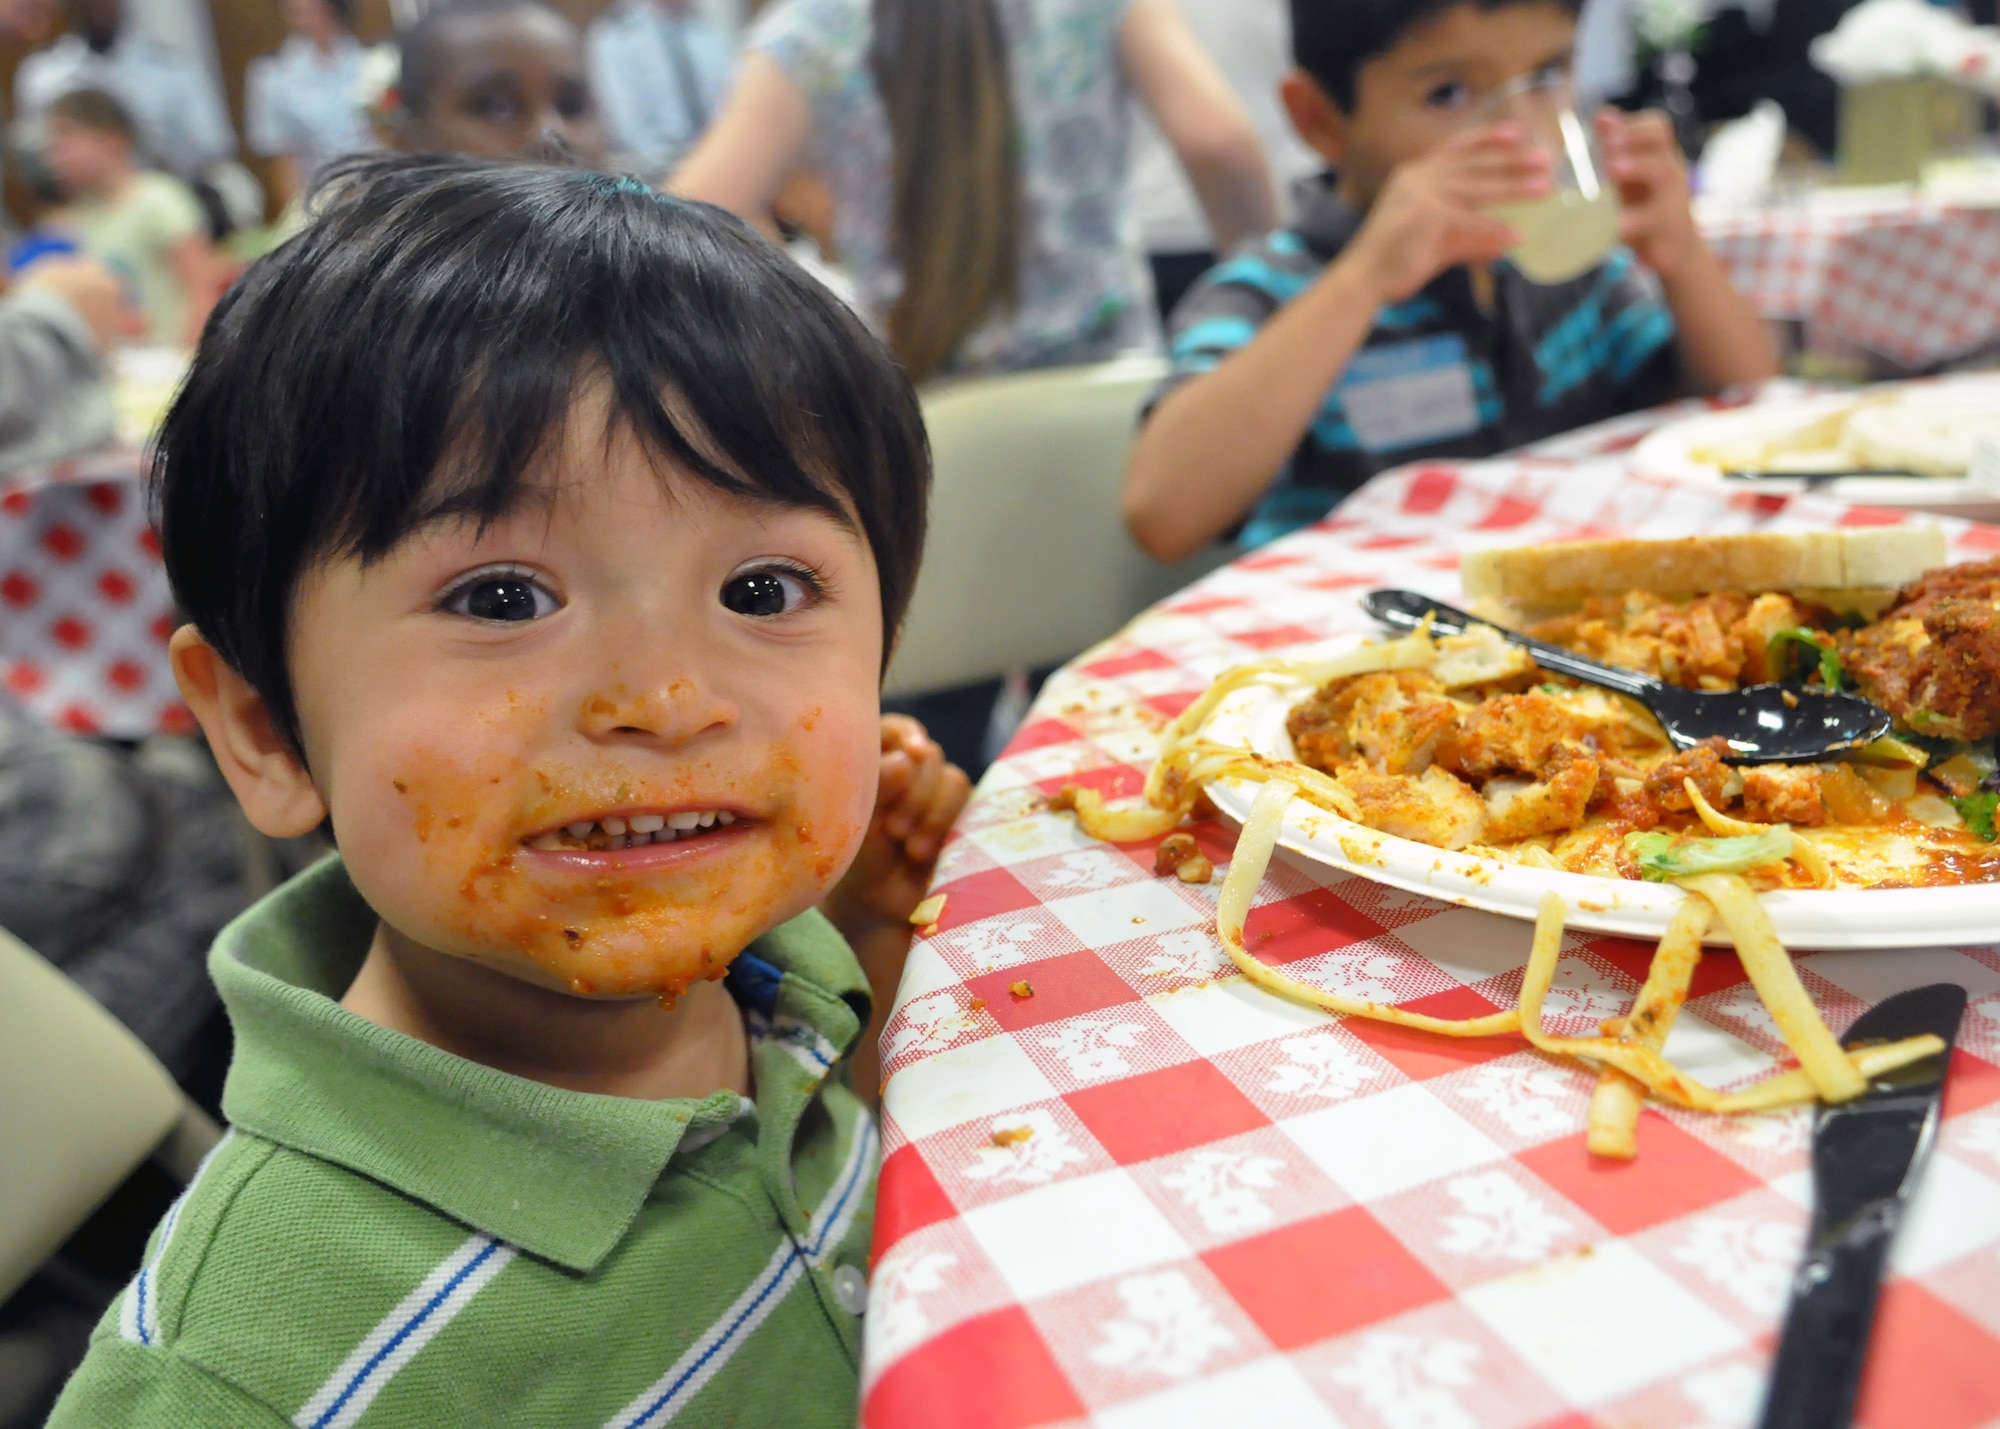 Adrian Vilca, son of Staff Sgts. Eddson and Katherine Vilca, enjoys a spaghetti dinner June 11, 2012, at the McChord Field Chapel Support Center on Joint Base Lewis-McChord, Wash. The family was attending the quarterly Deployed Families Dinner, which provides support to families who are currently coping with a deployment of a loved one. (U.S. Air Force photo/Senior Airman Leah Young)